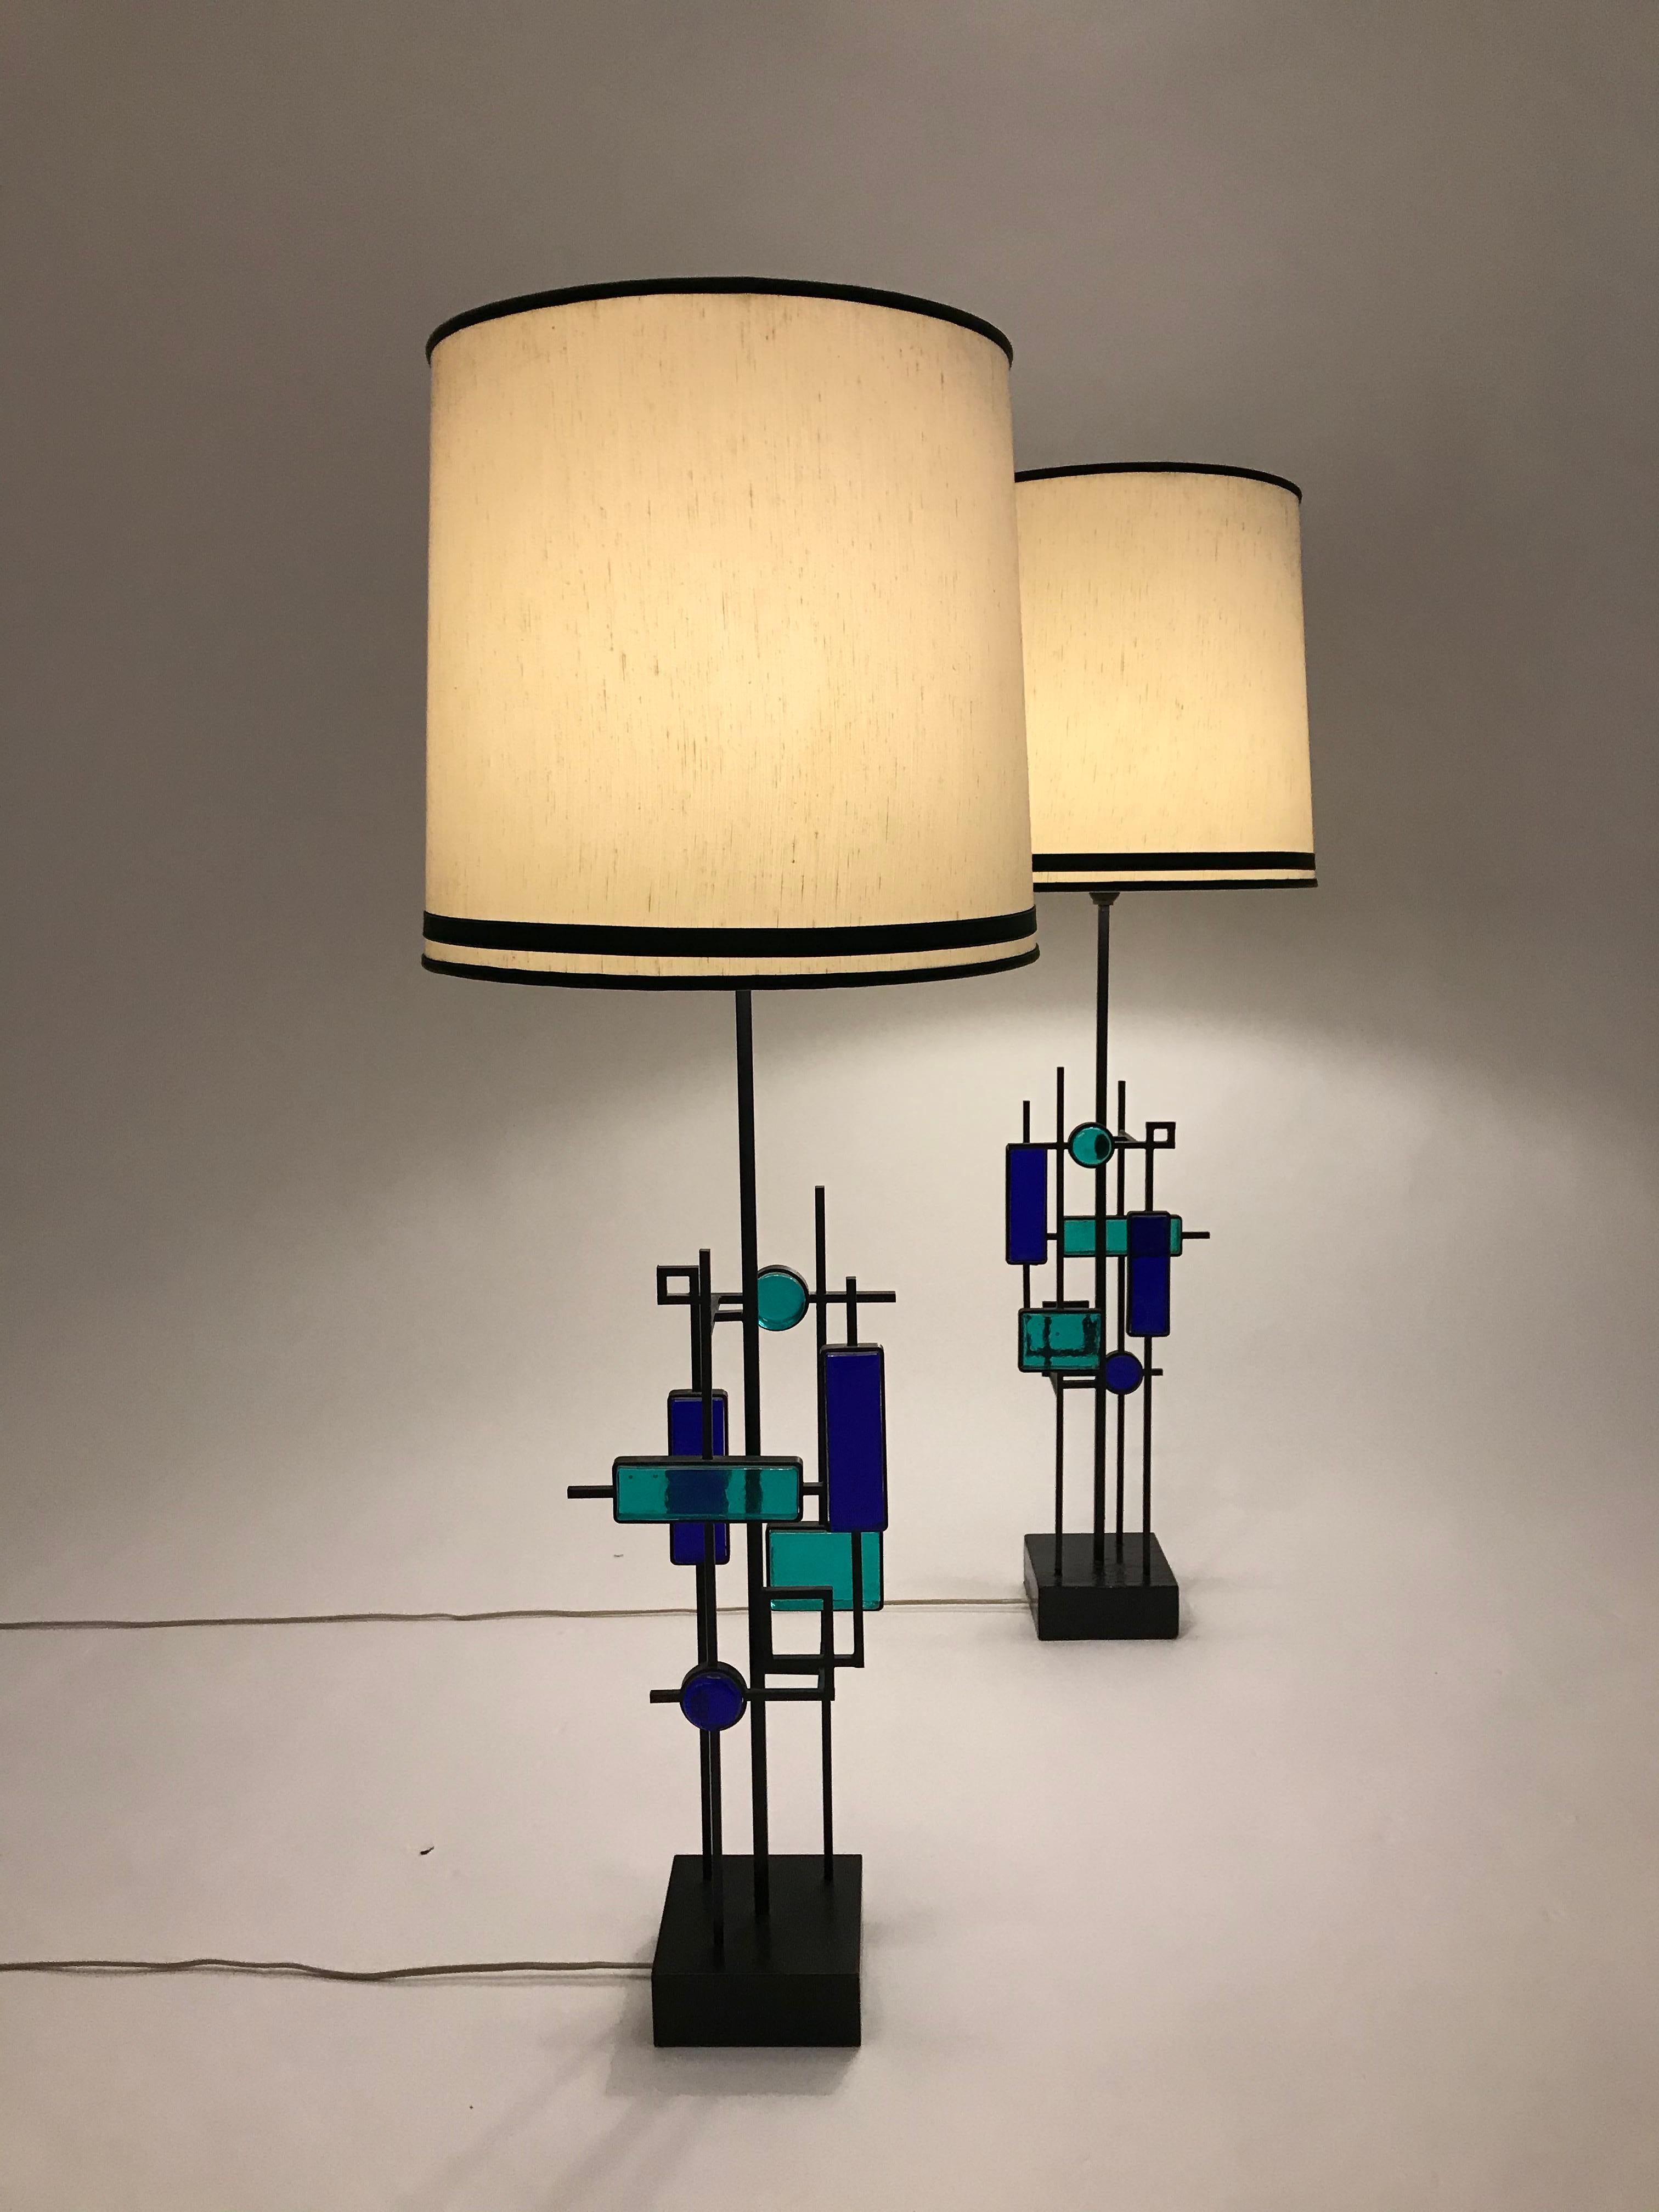 Danish Pair of Tall Mid-Century Iron and Glass Table Lamps by Svend Aage Holm Sorensen